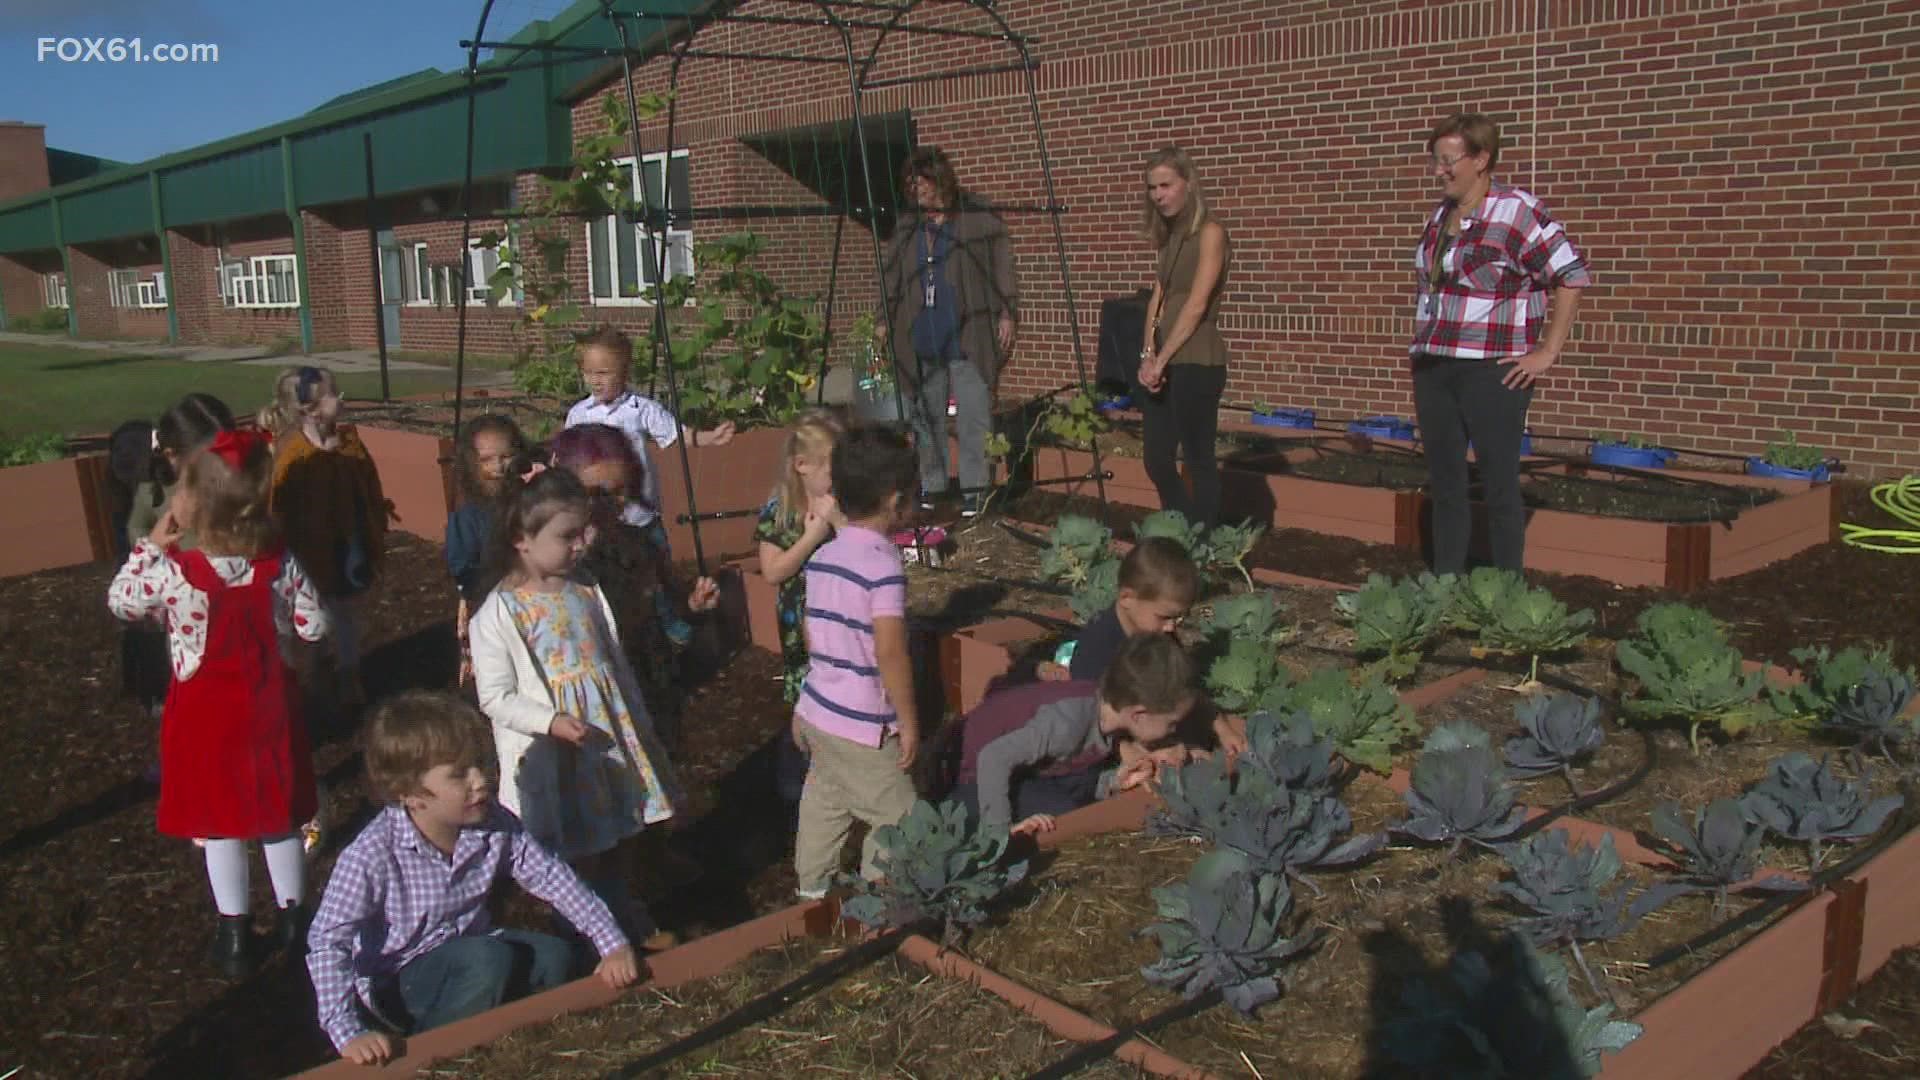 You may have heard of farm-to-table, but what about farm-to-school? It’s a concept they’re just starting at Memorial School in East Hampton.